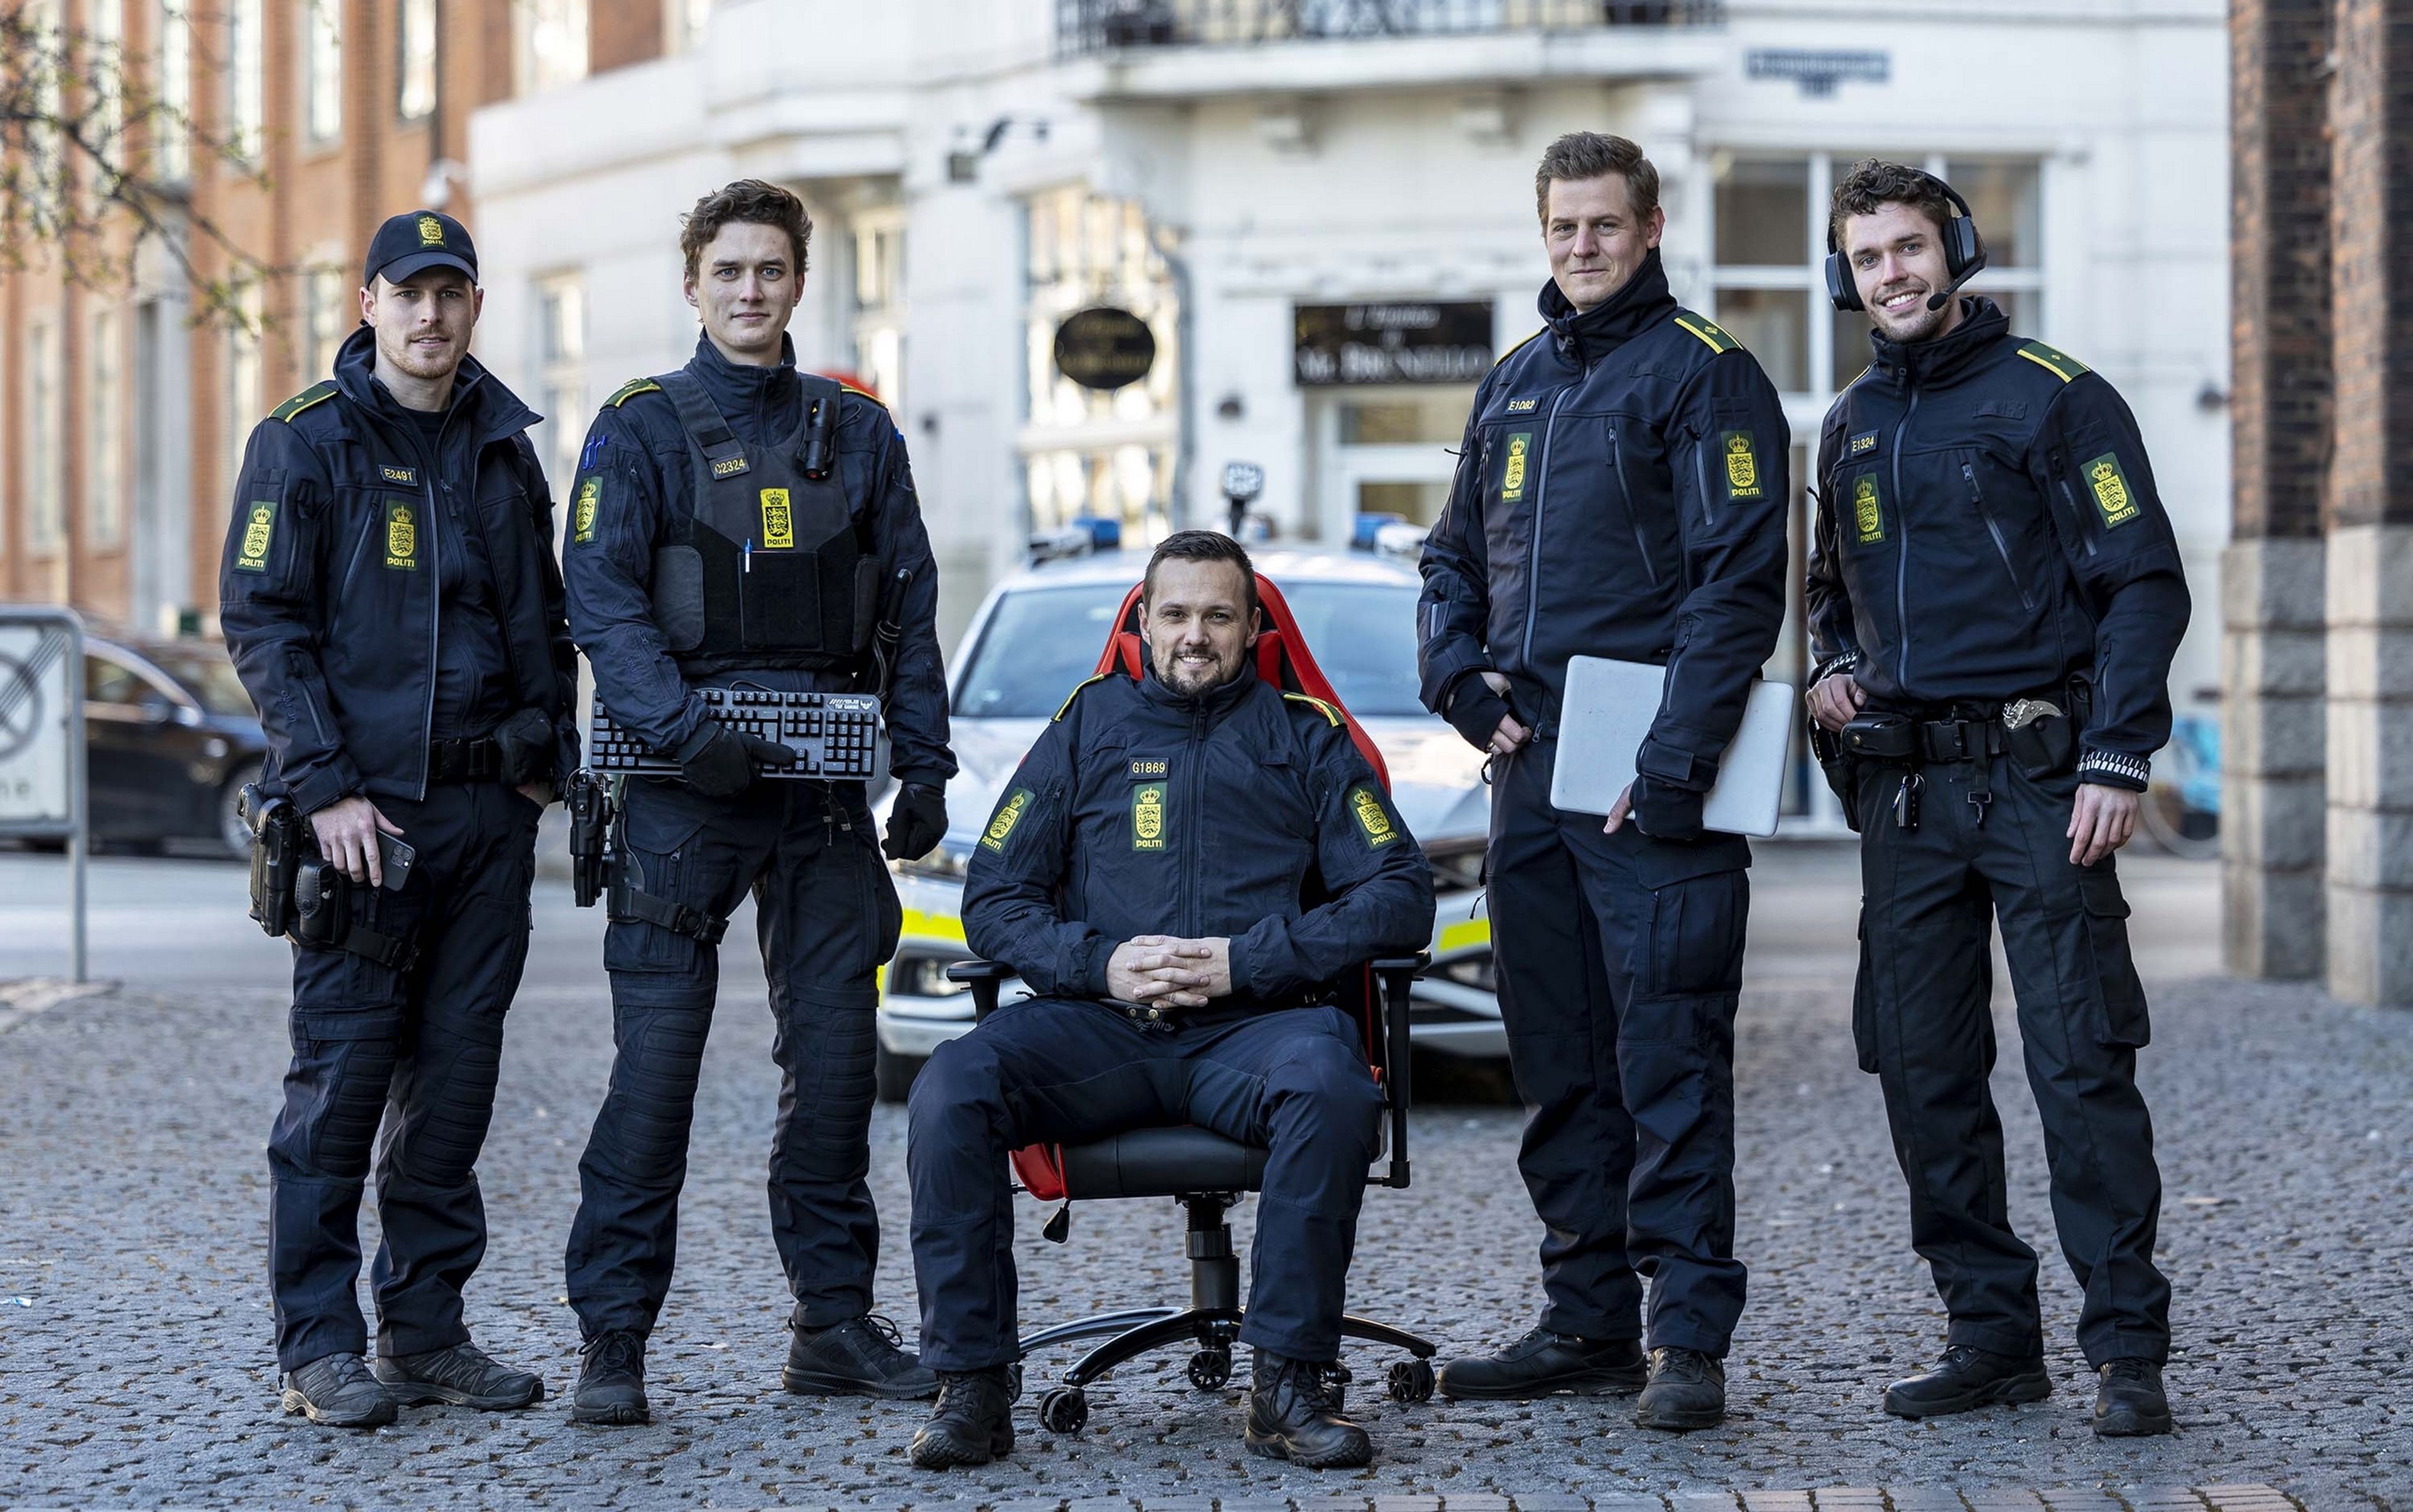 Danish police have a gaming team that plays Fortnite and Minecraft to protect minors